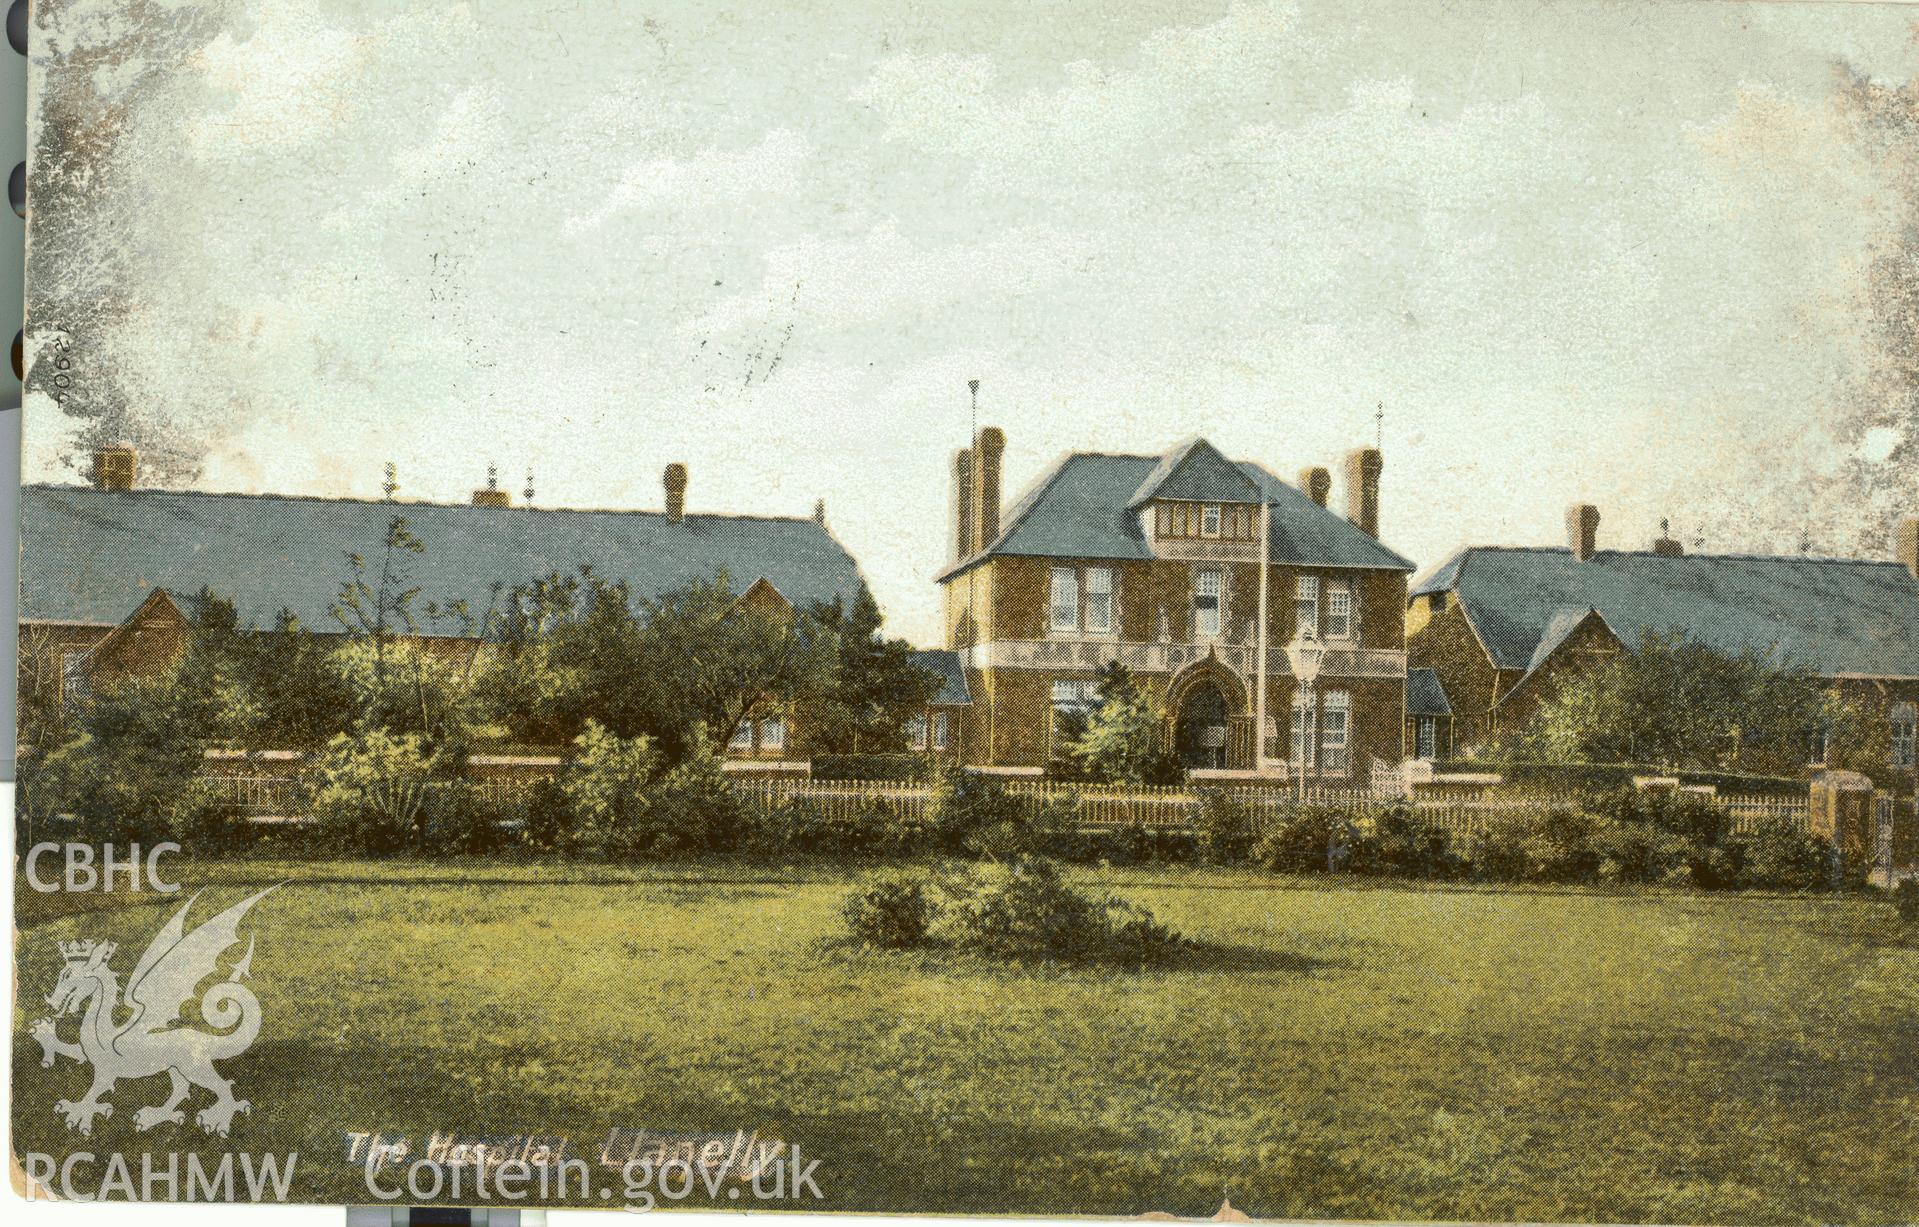 Digitised postcard image of Llanelli Hospital, The Wrench series. Produced by Parks and Gardens Data Services, from an original item in the Peter Davis Collection at Parks and Gardens UK. We hold only web-resolution images of this collection, suitable for viewing on screen and for research purposes only. We do not hold the original images, or publication quality scans.